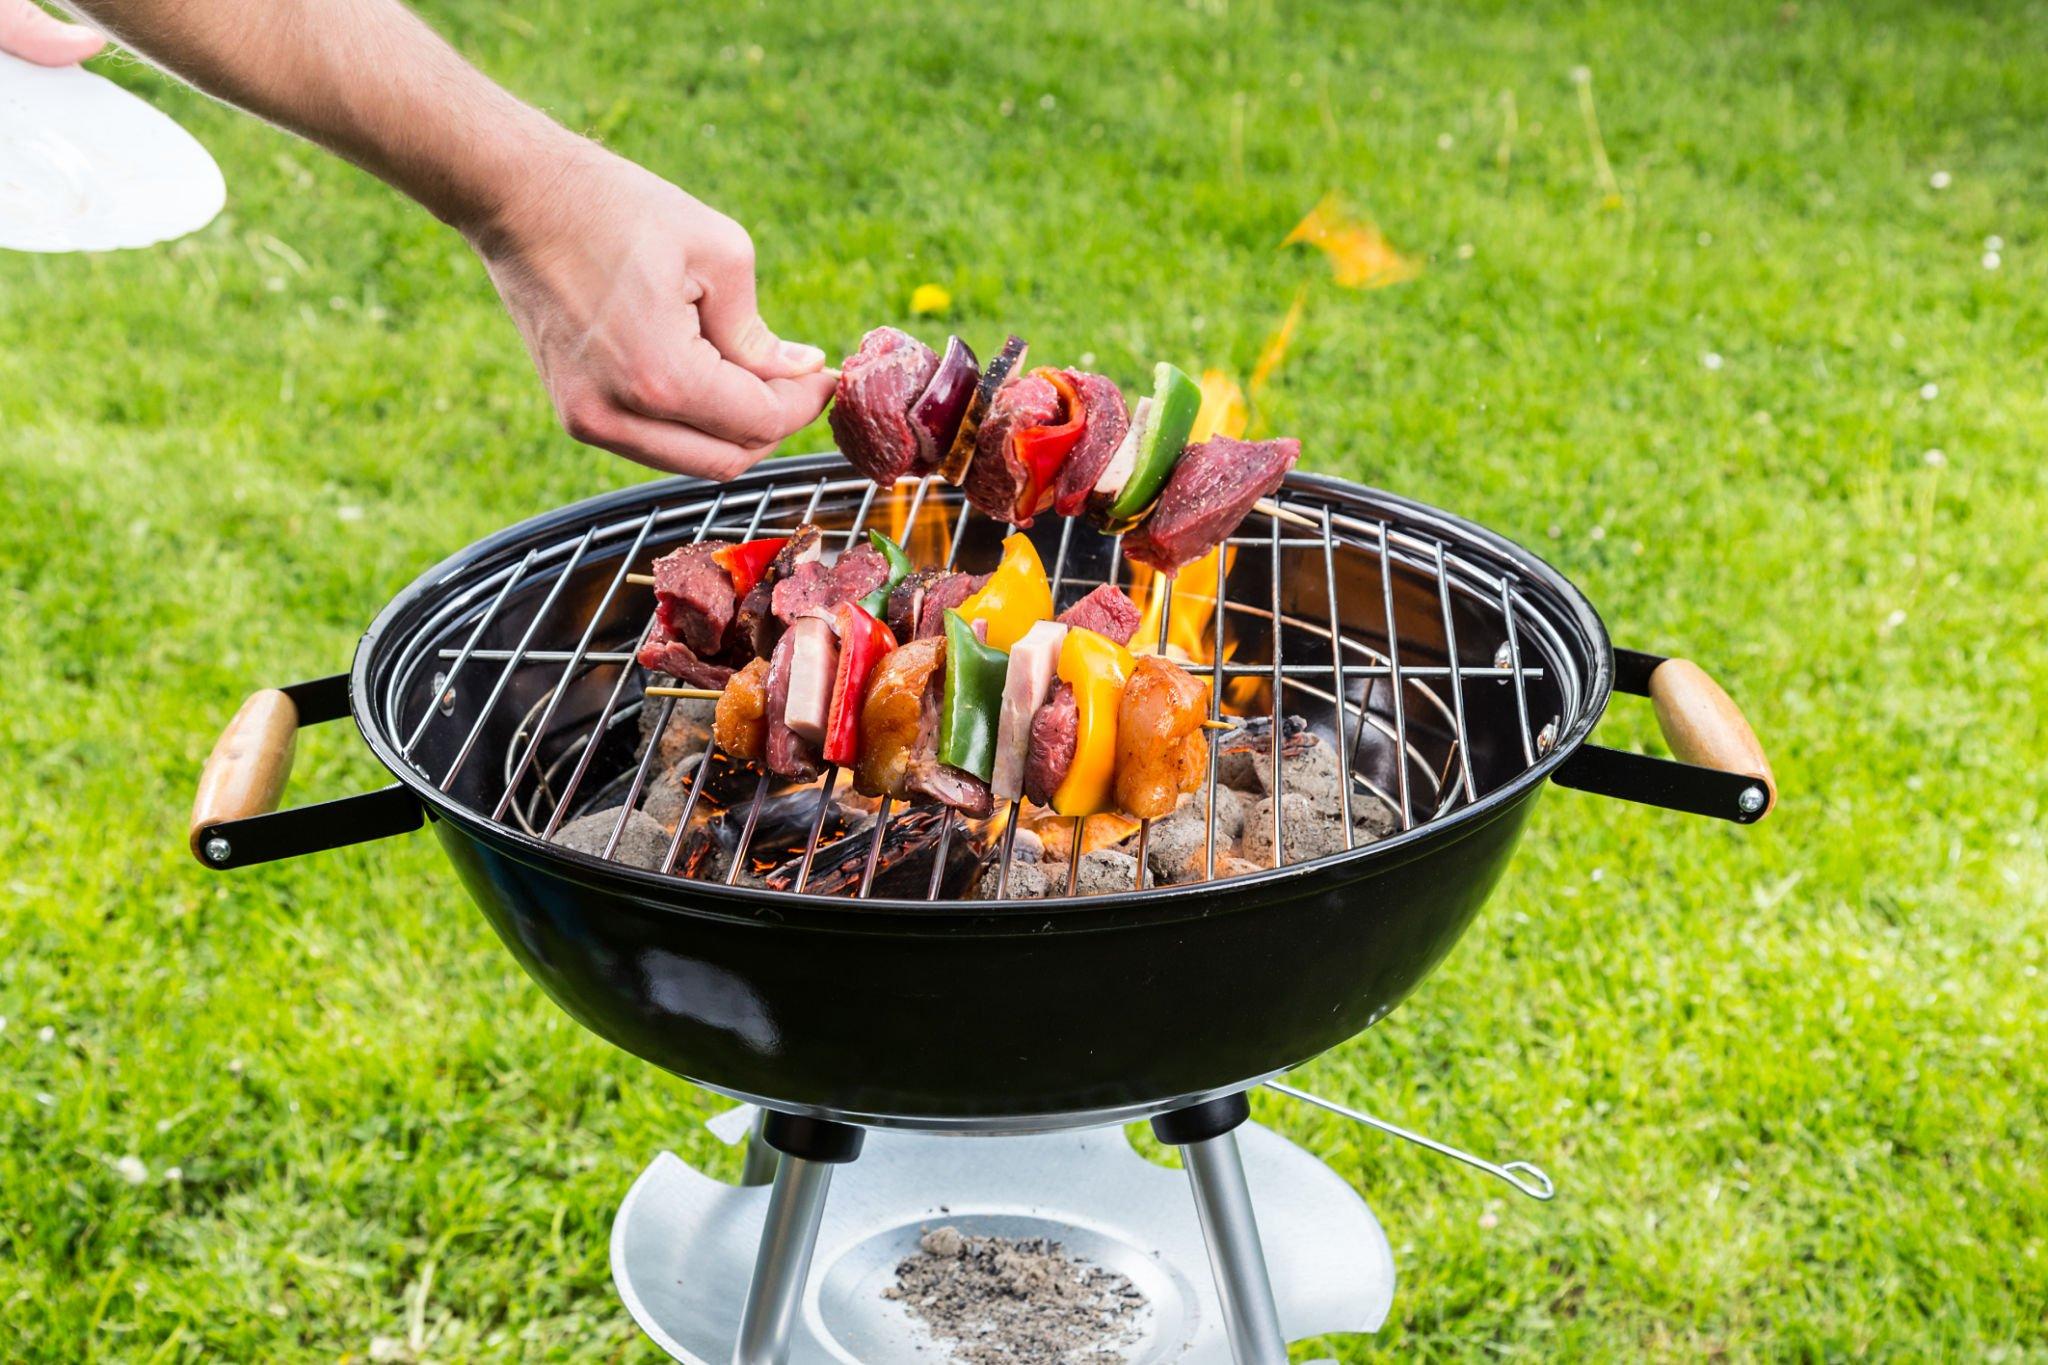 BBQs 2u Recommends Portable Barbecues of MasterBuilt to Affordably Fit Your Space